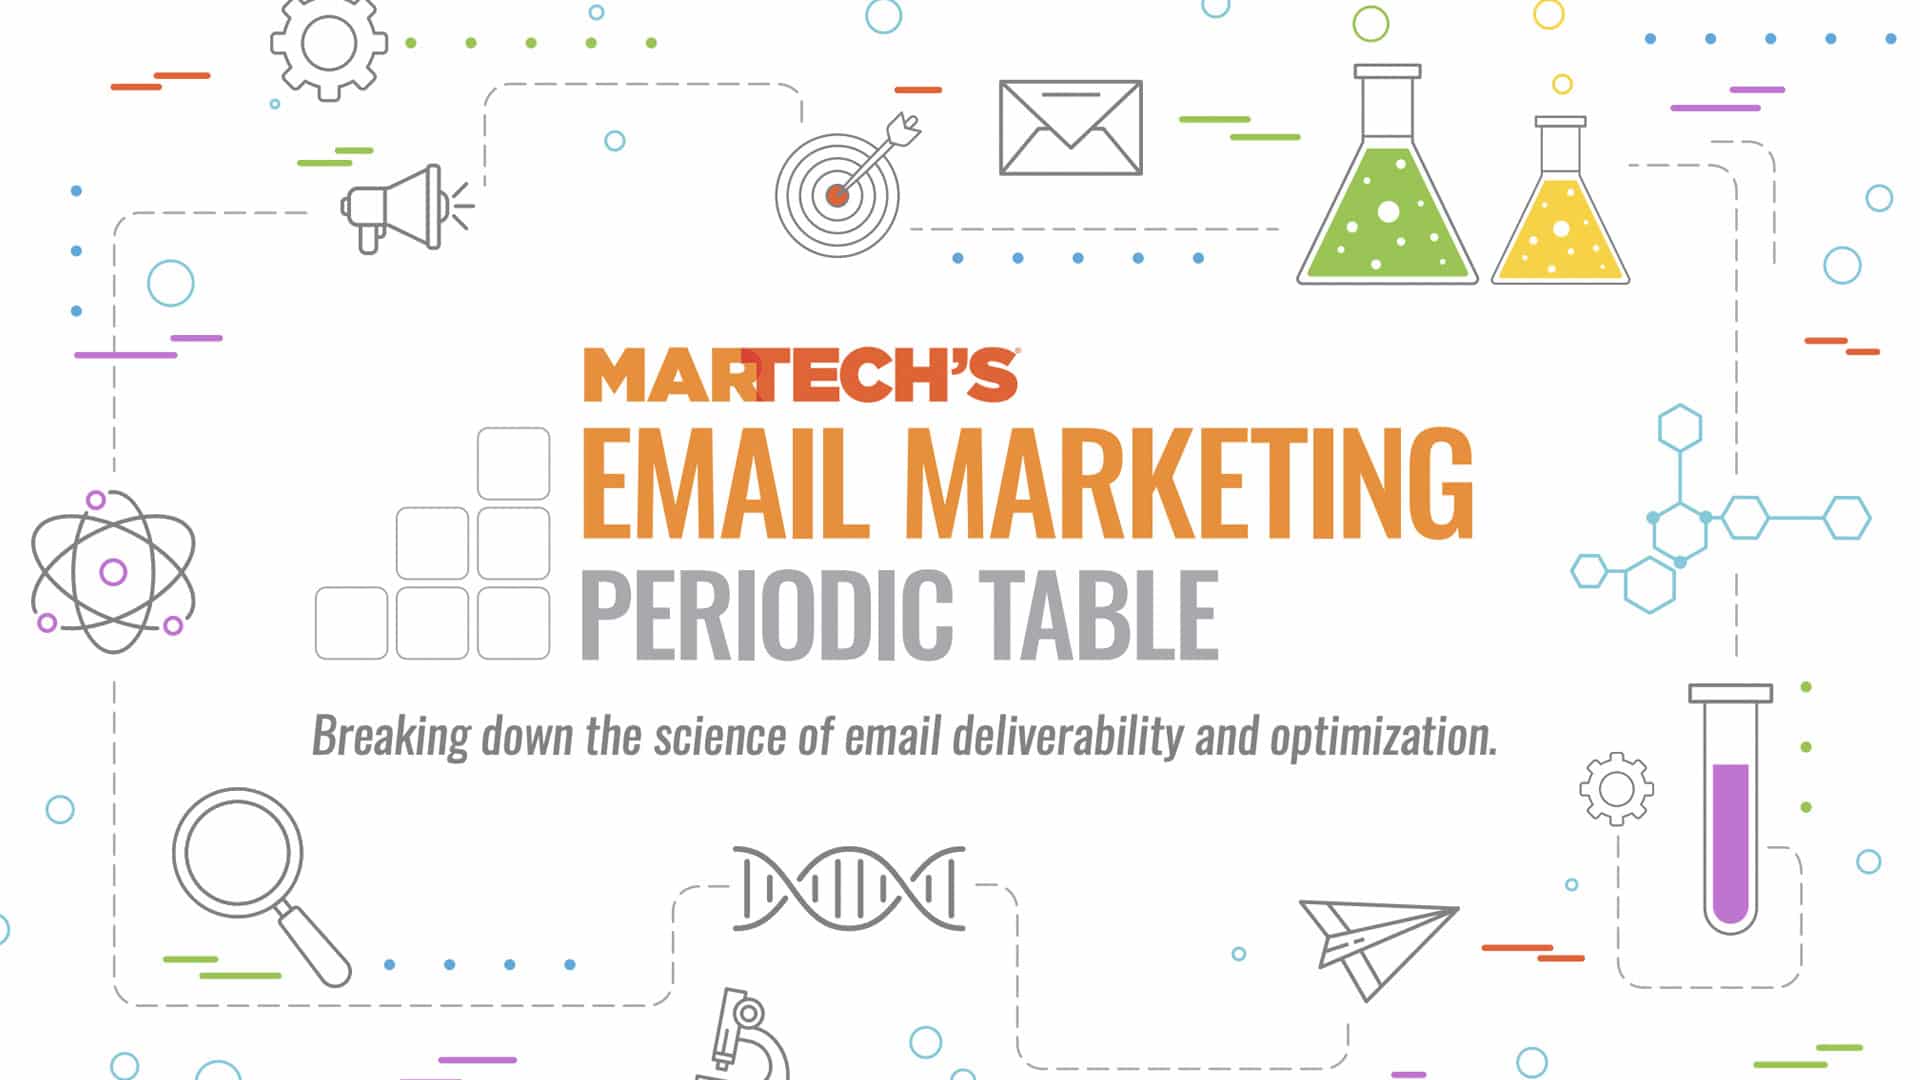 MarTech's Email Marketing Periodic Table